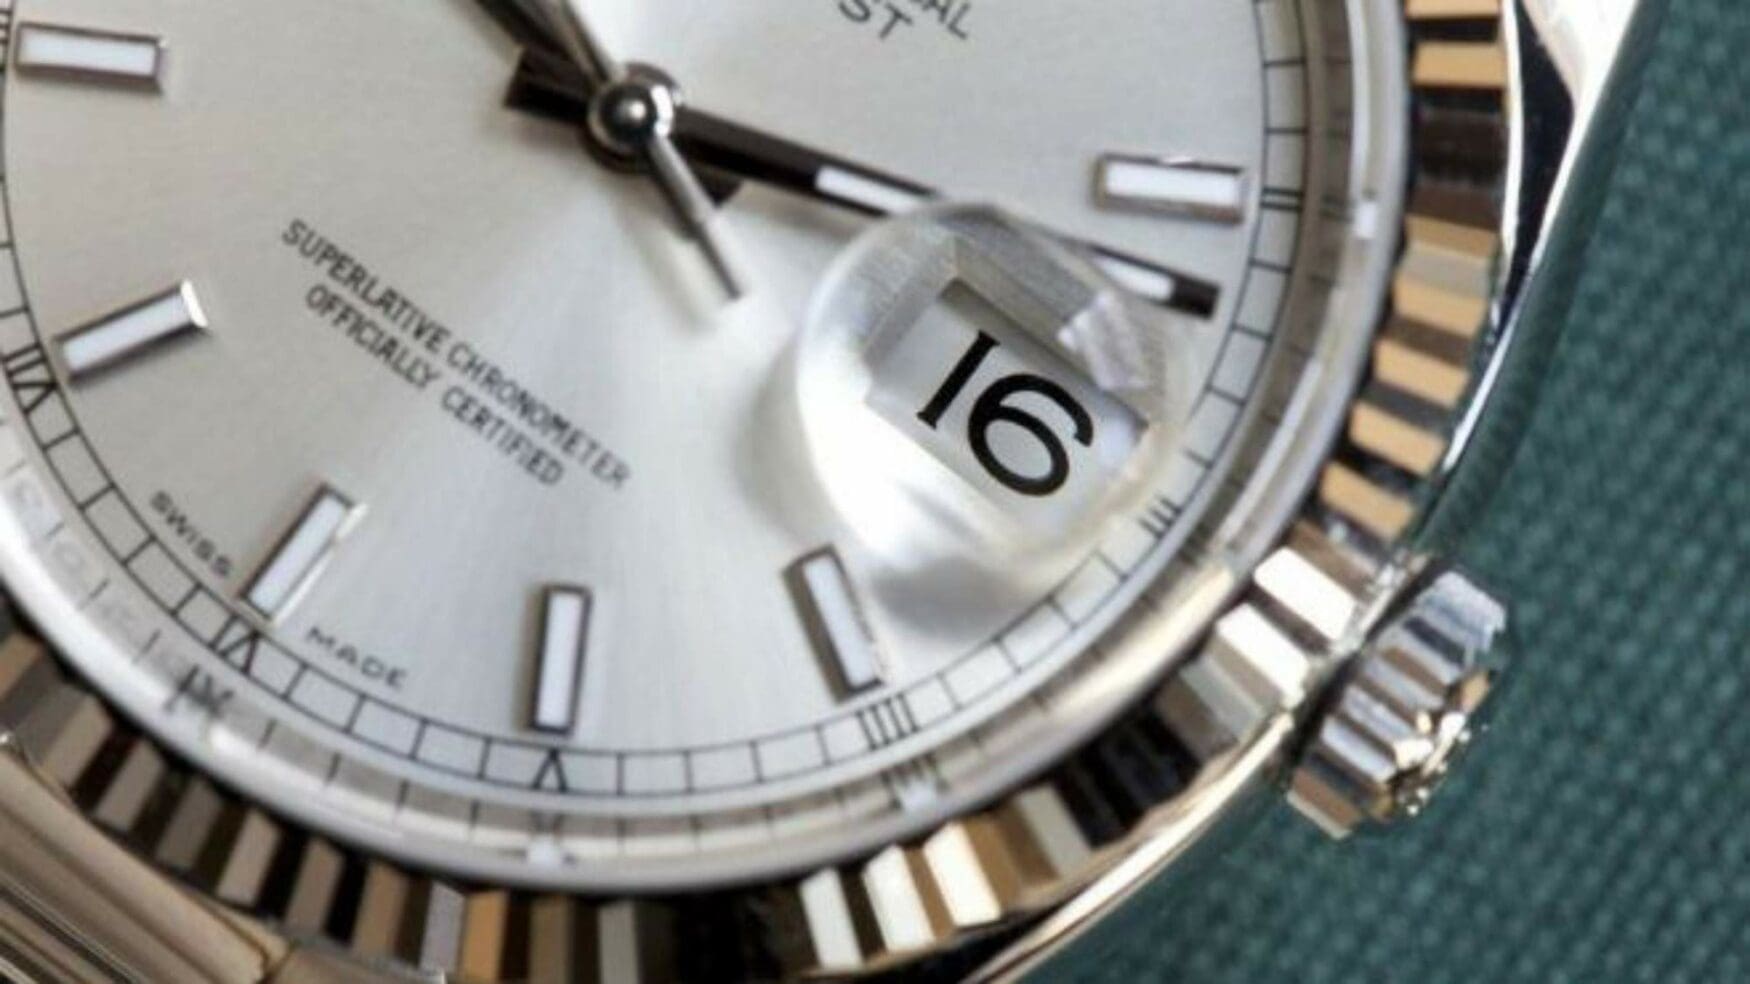 Close but no cigar: Why I welcome horological deal breakers